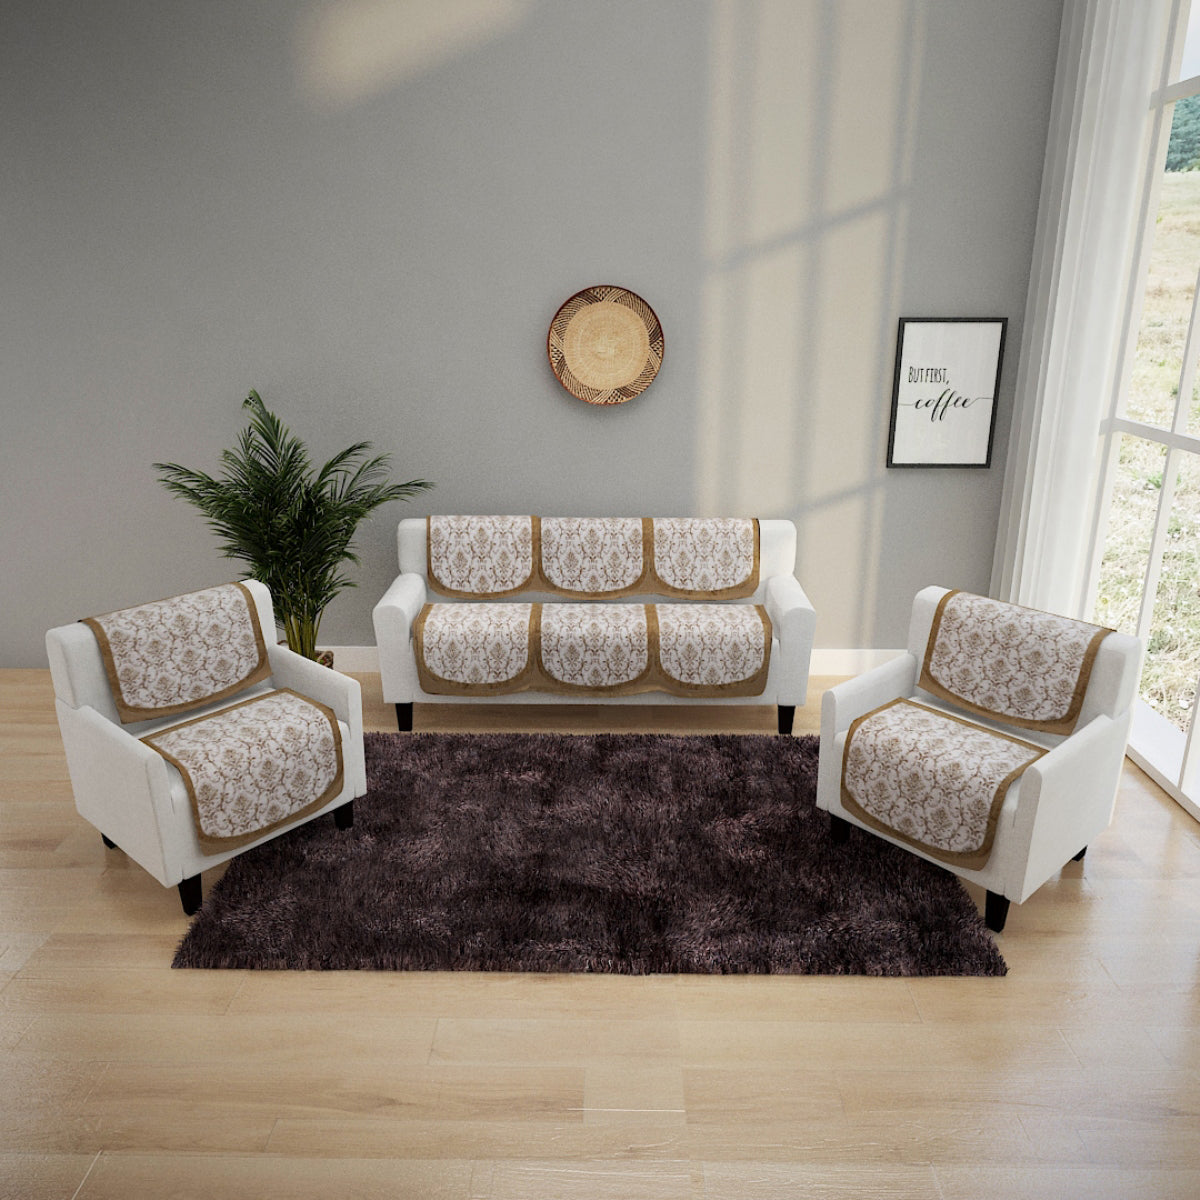 6-Pieces Brown & White Woven Design 5-Seater Sofa Covers